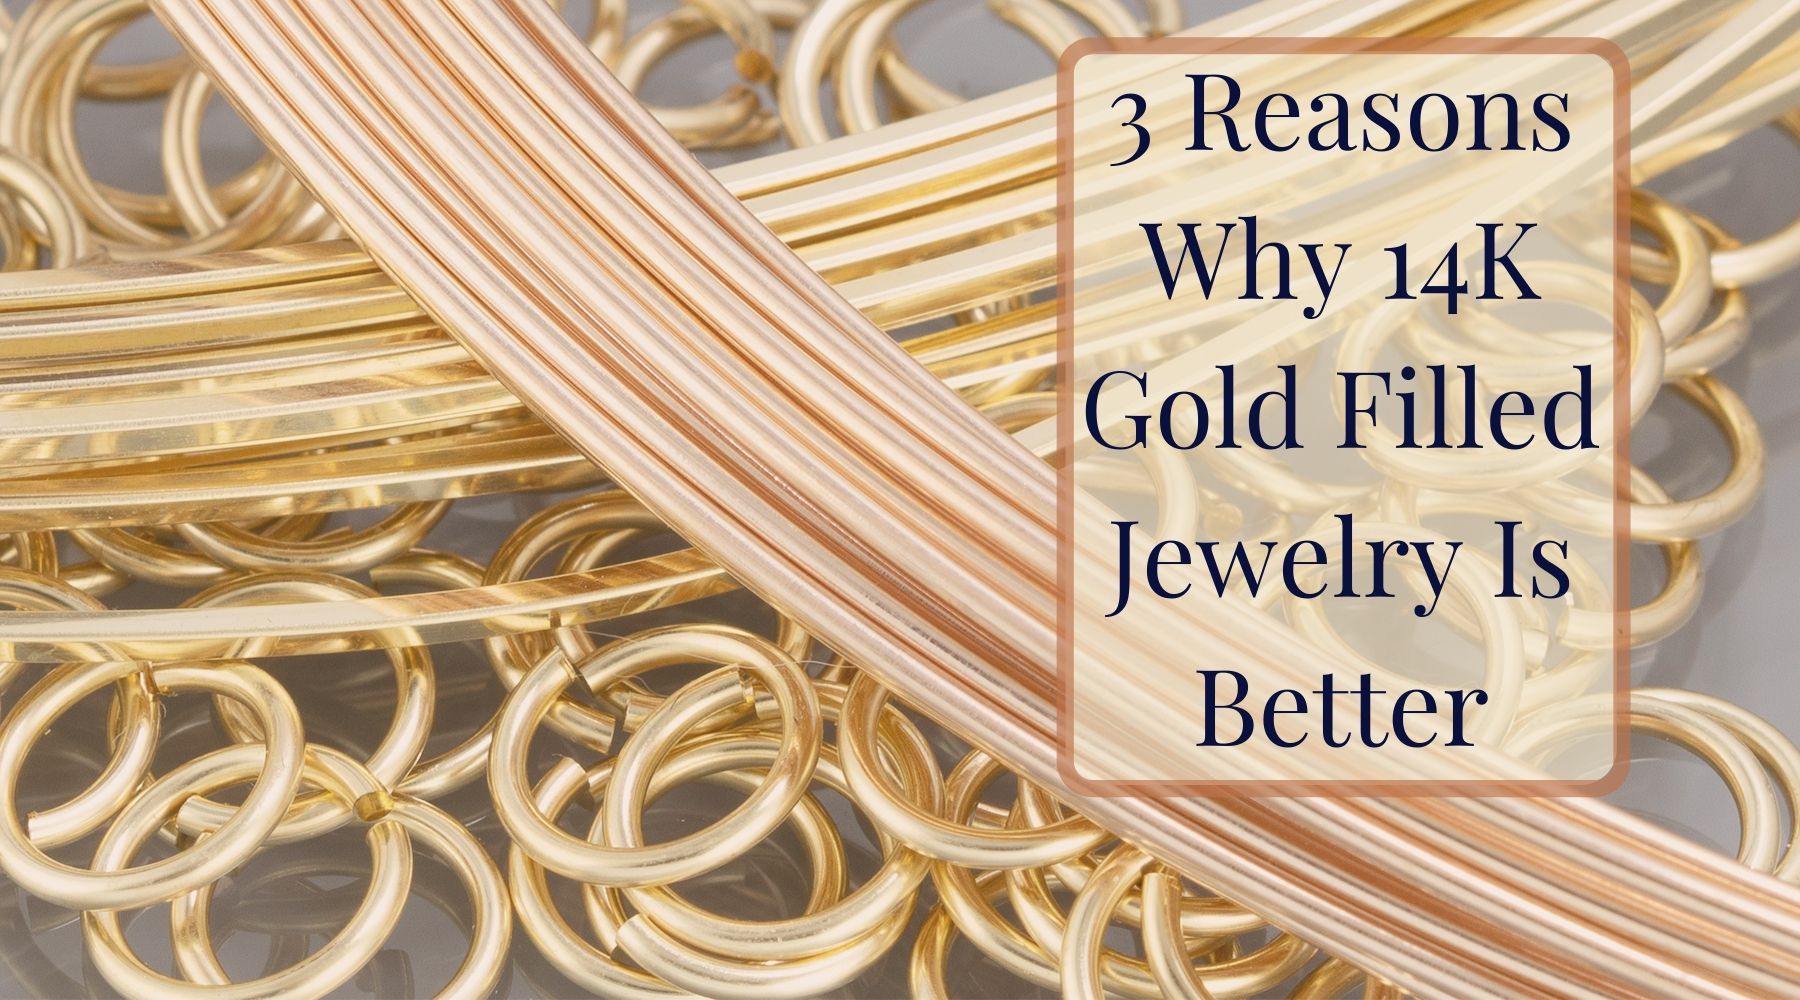 3 Reasons Why 14K Gold Filled Jewelry Is Better